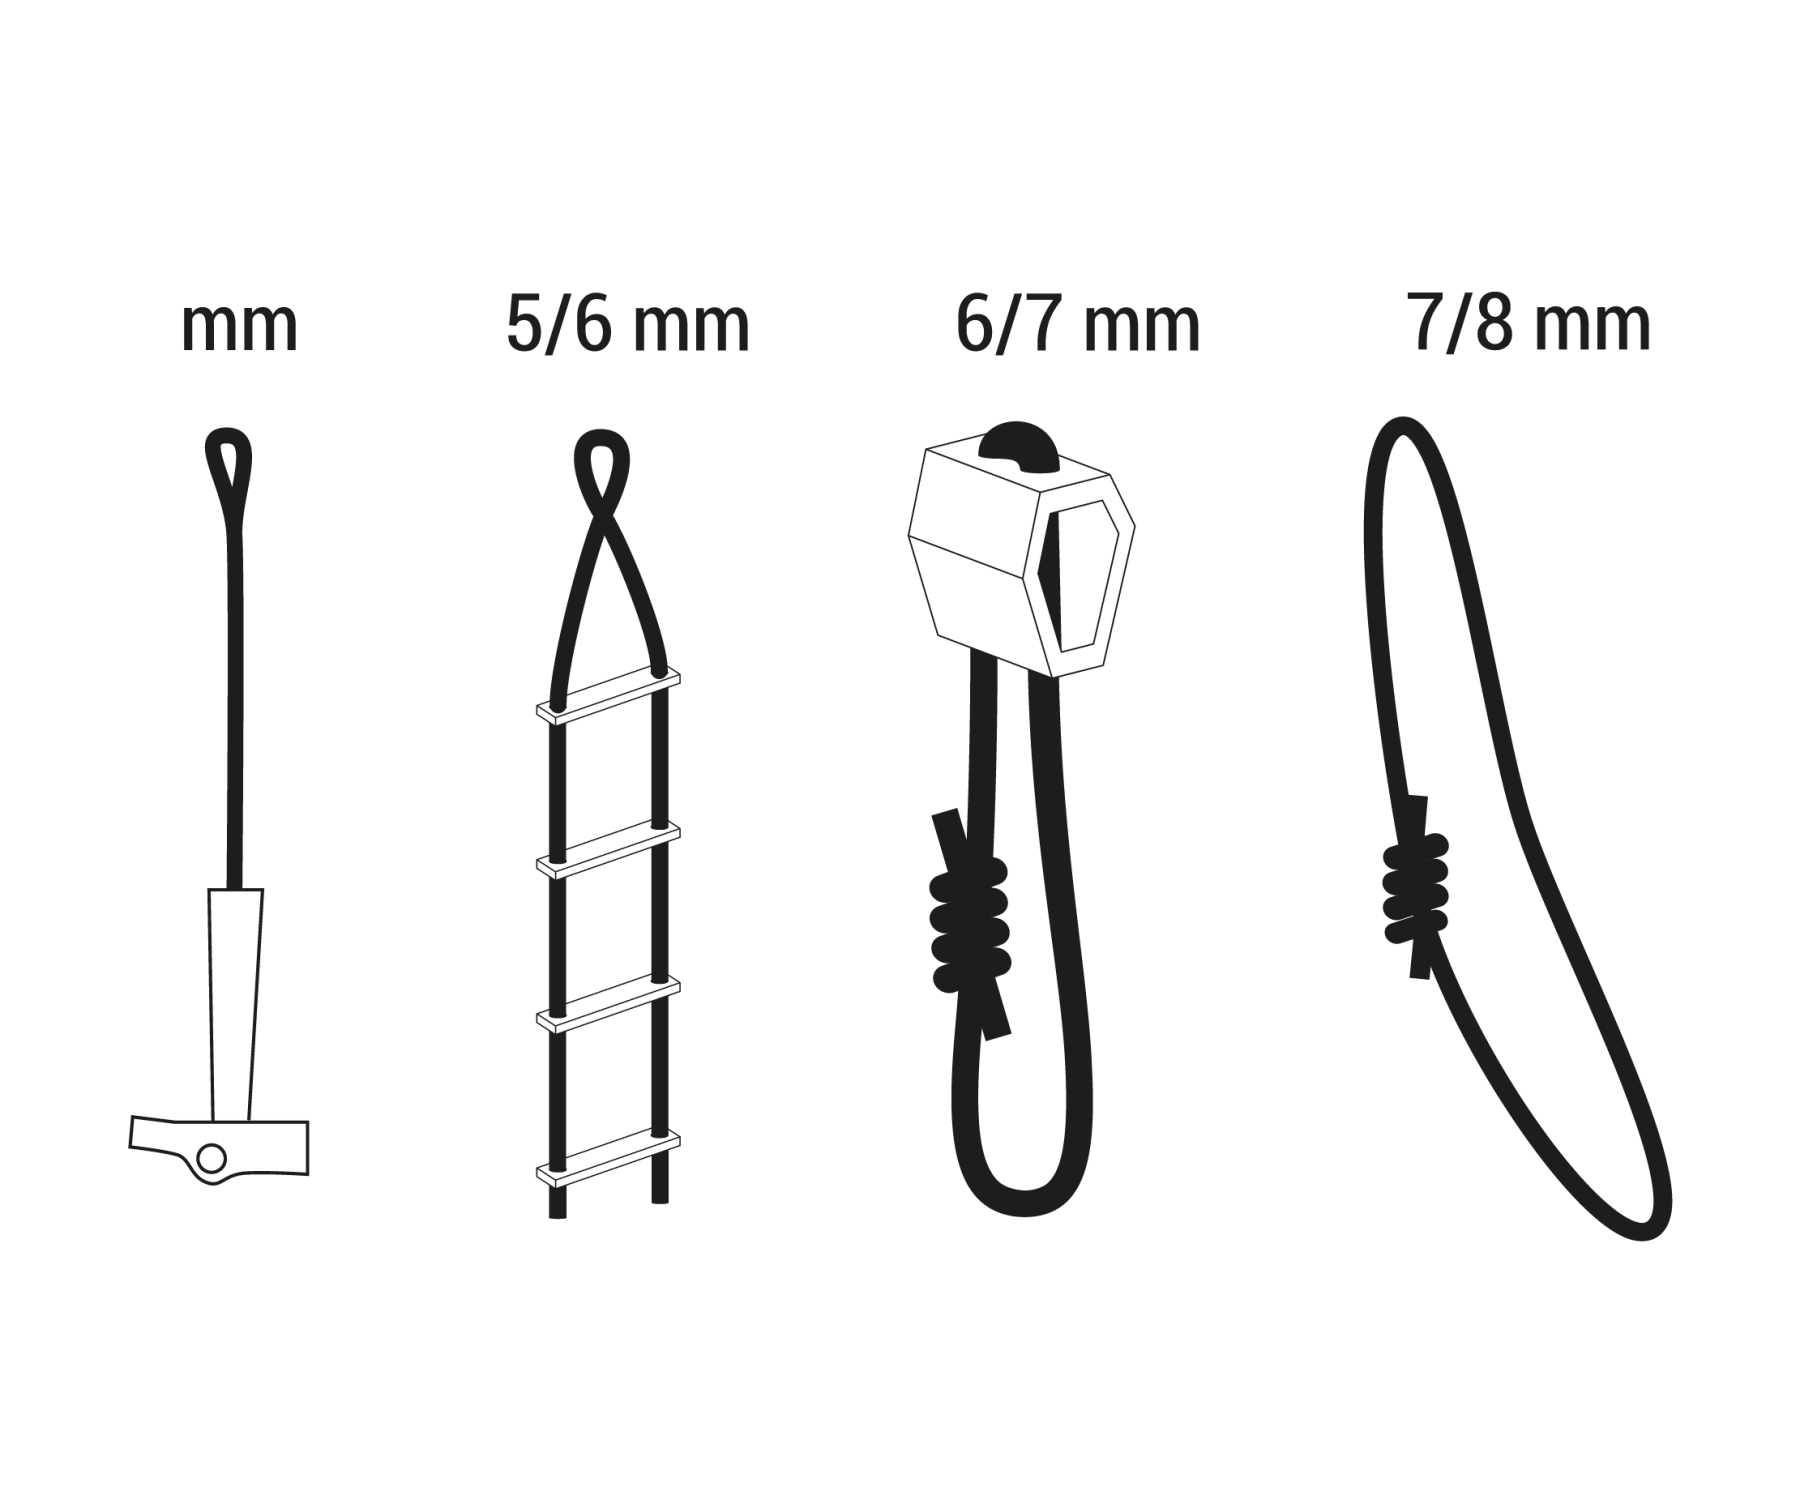 USER GUIDE FOR CORDS